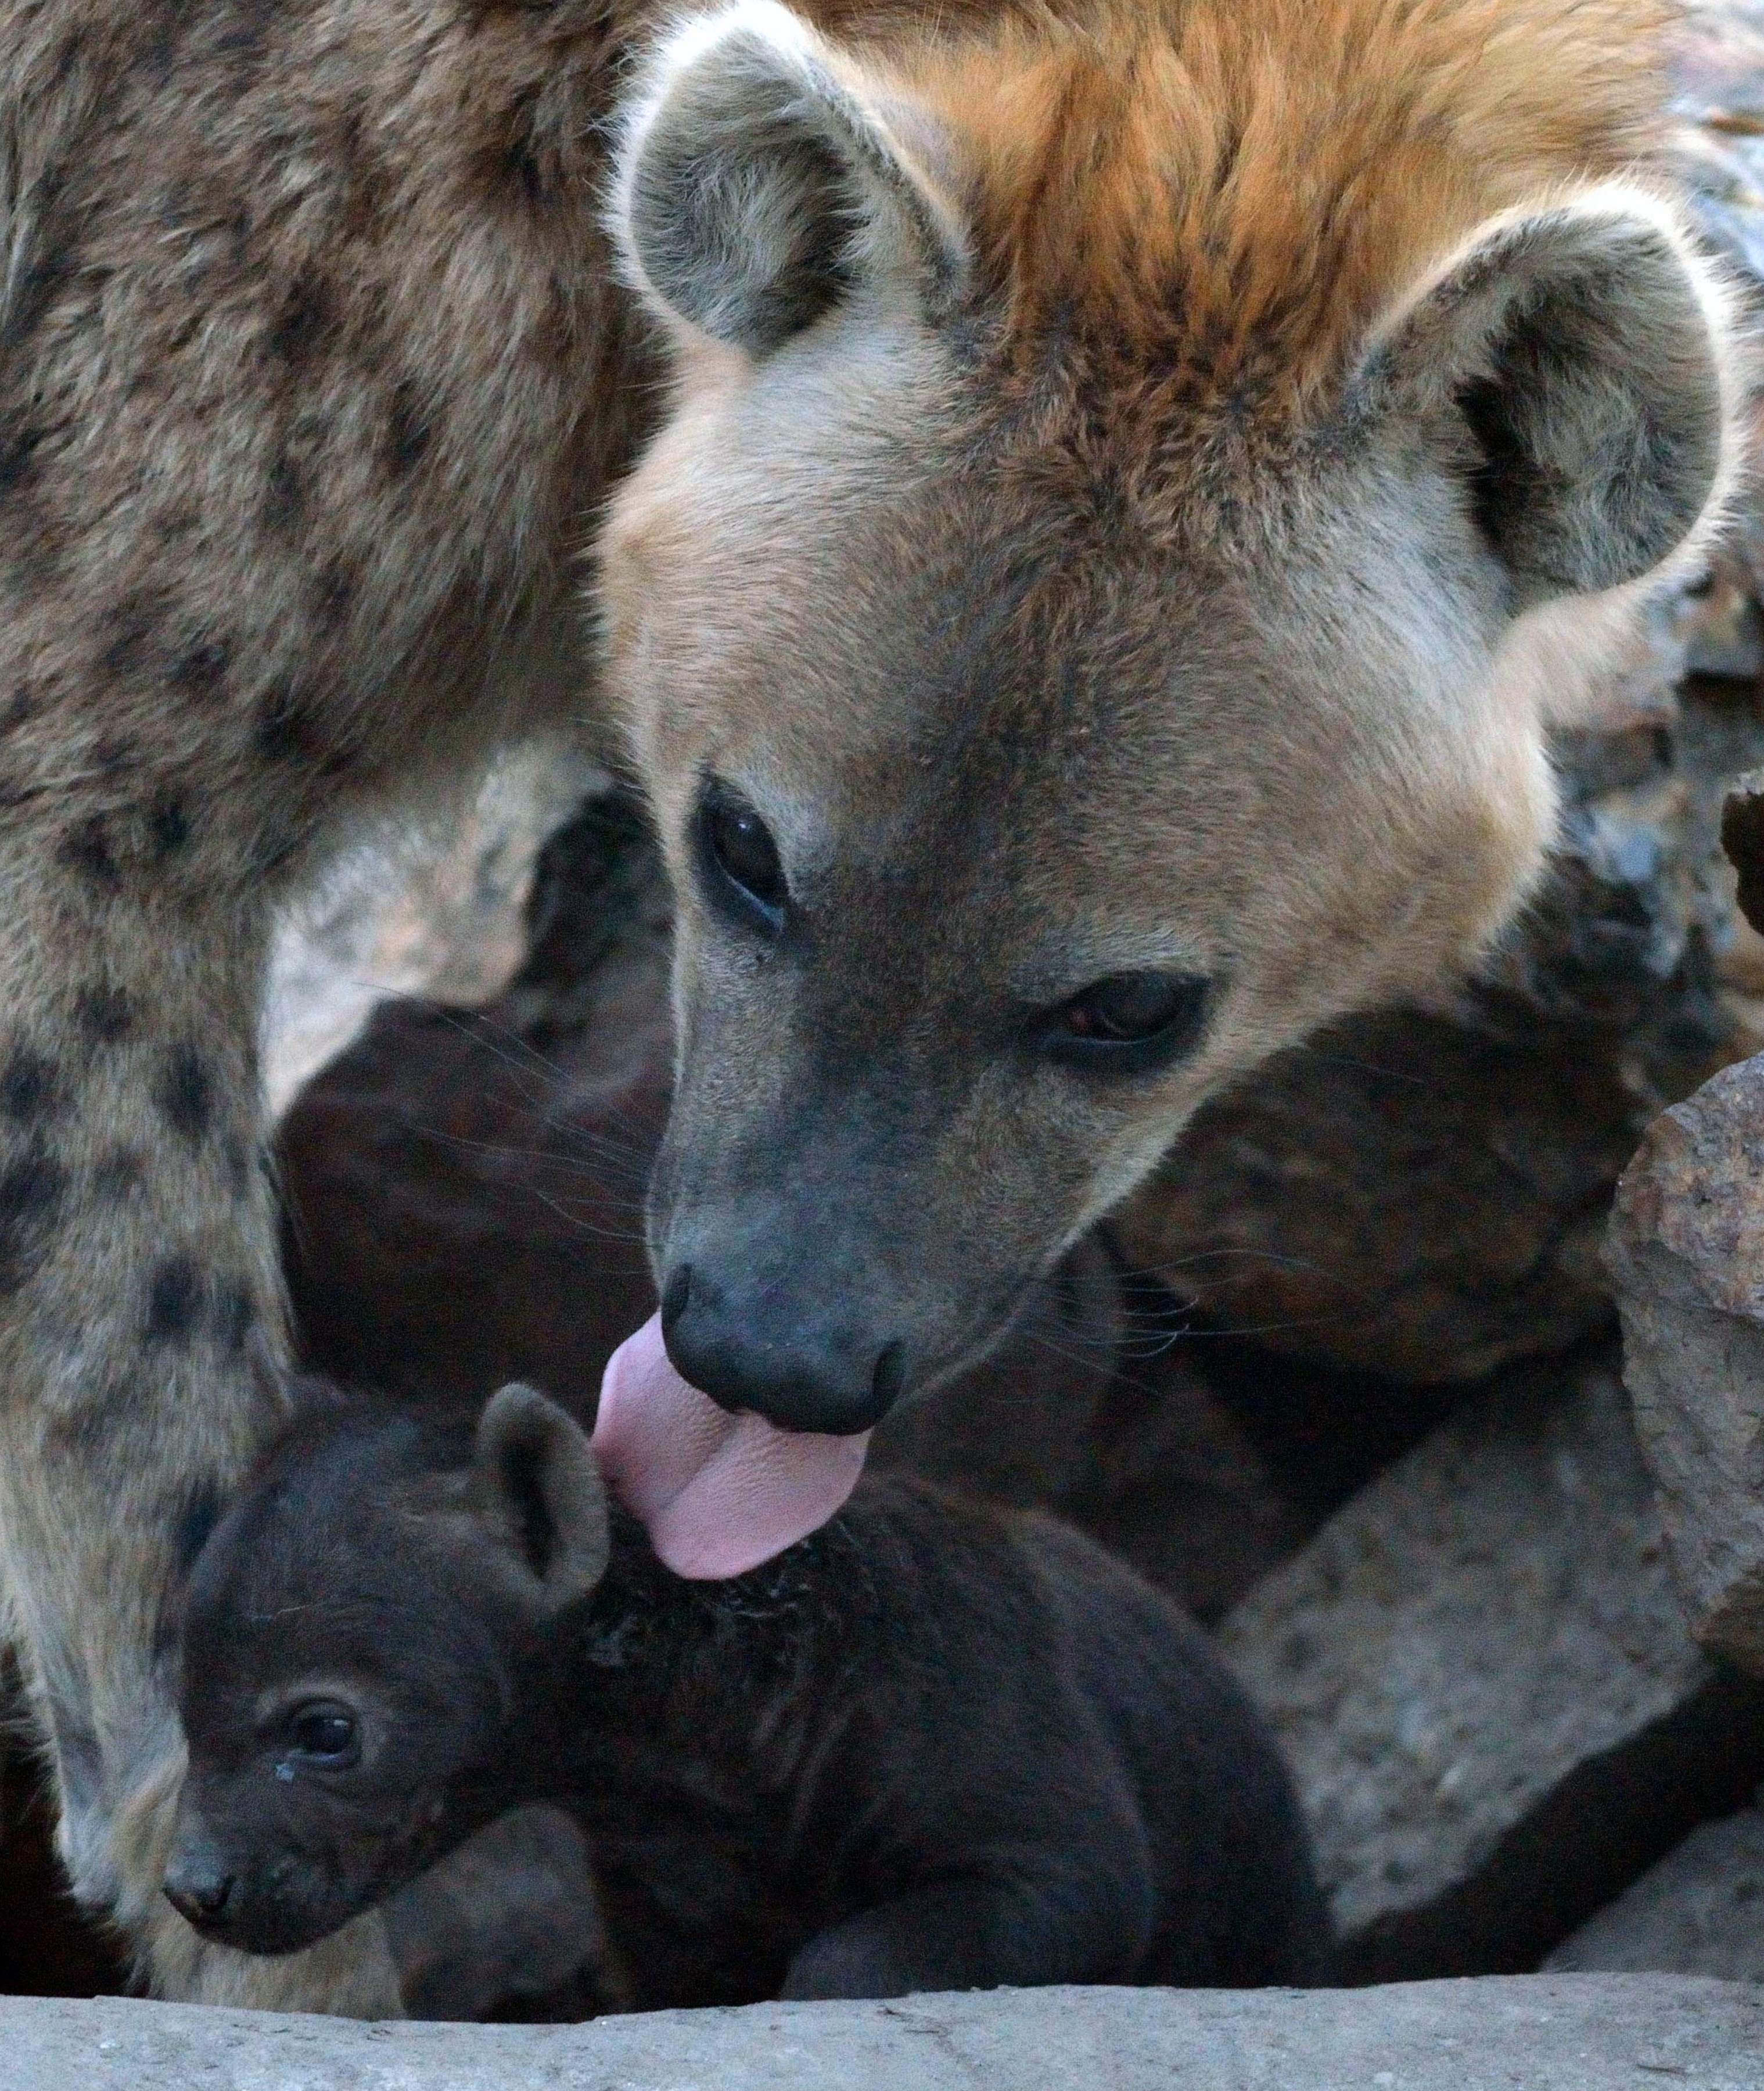 A newly born spotted hyena baby is cleaned by its mother at the Animal Garden in Szeged, Hungary on March 17, 2014.